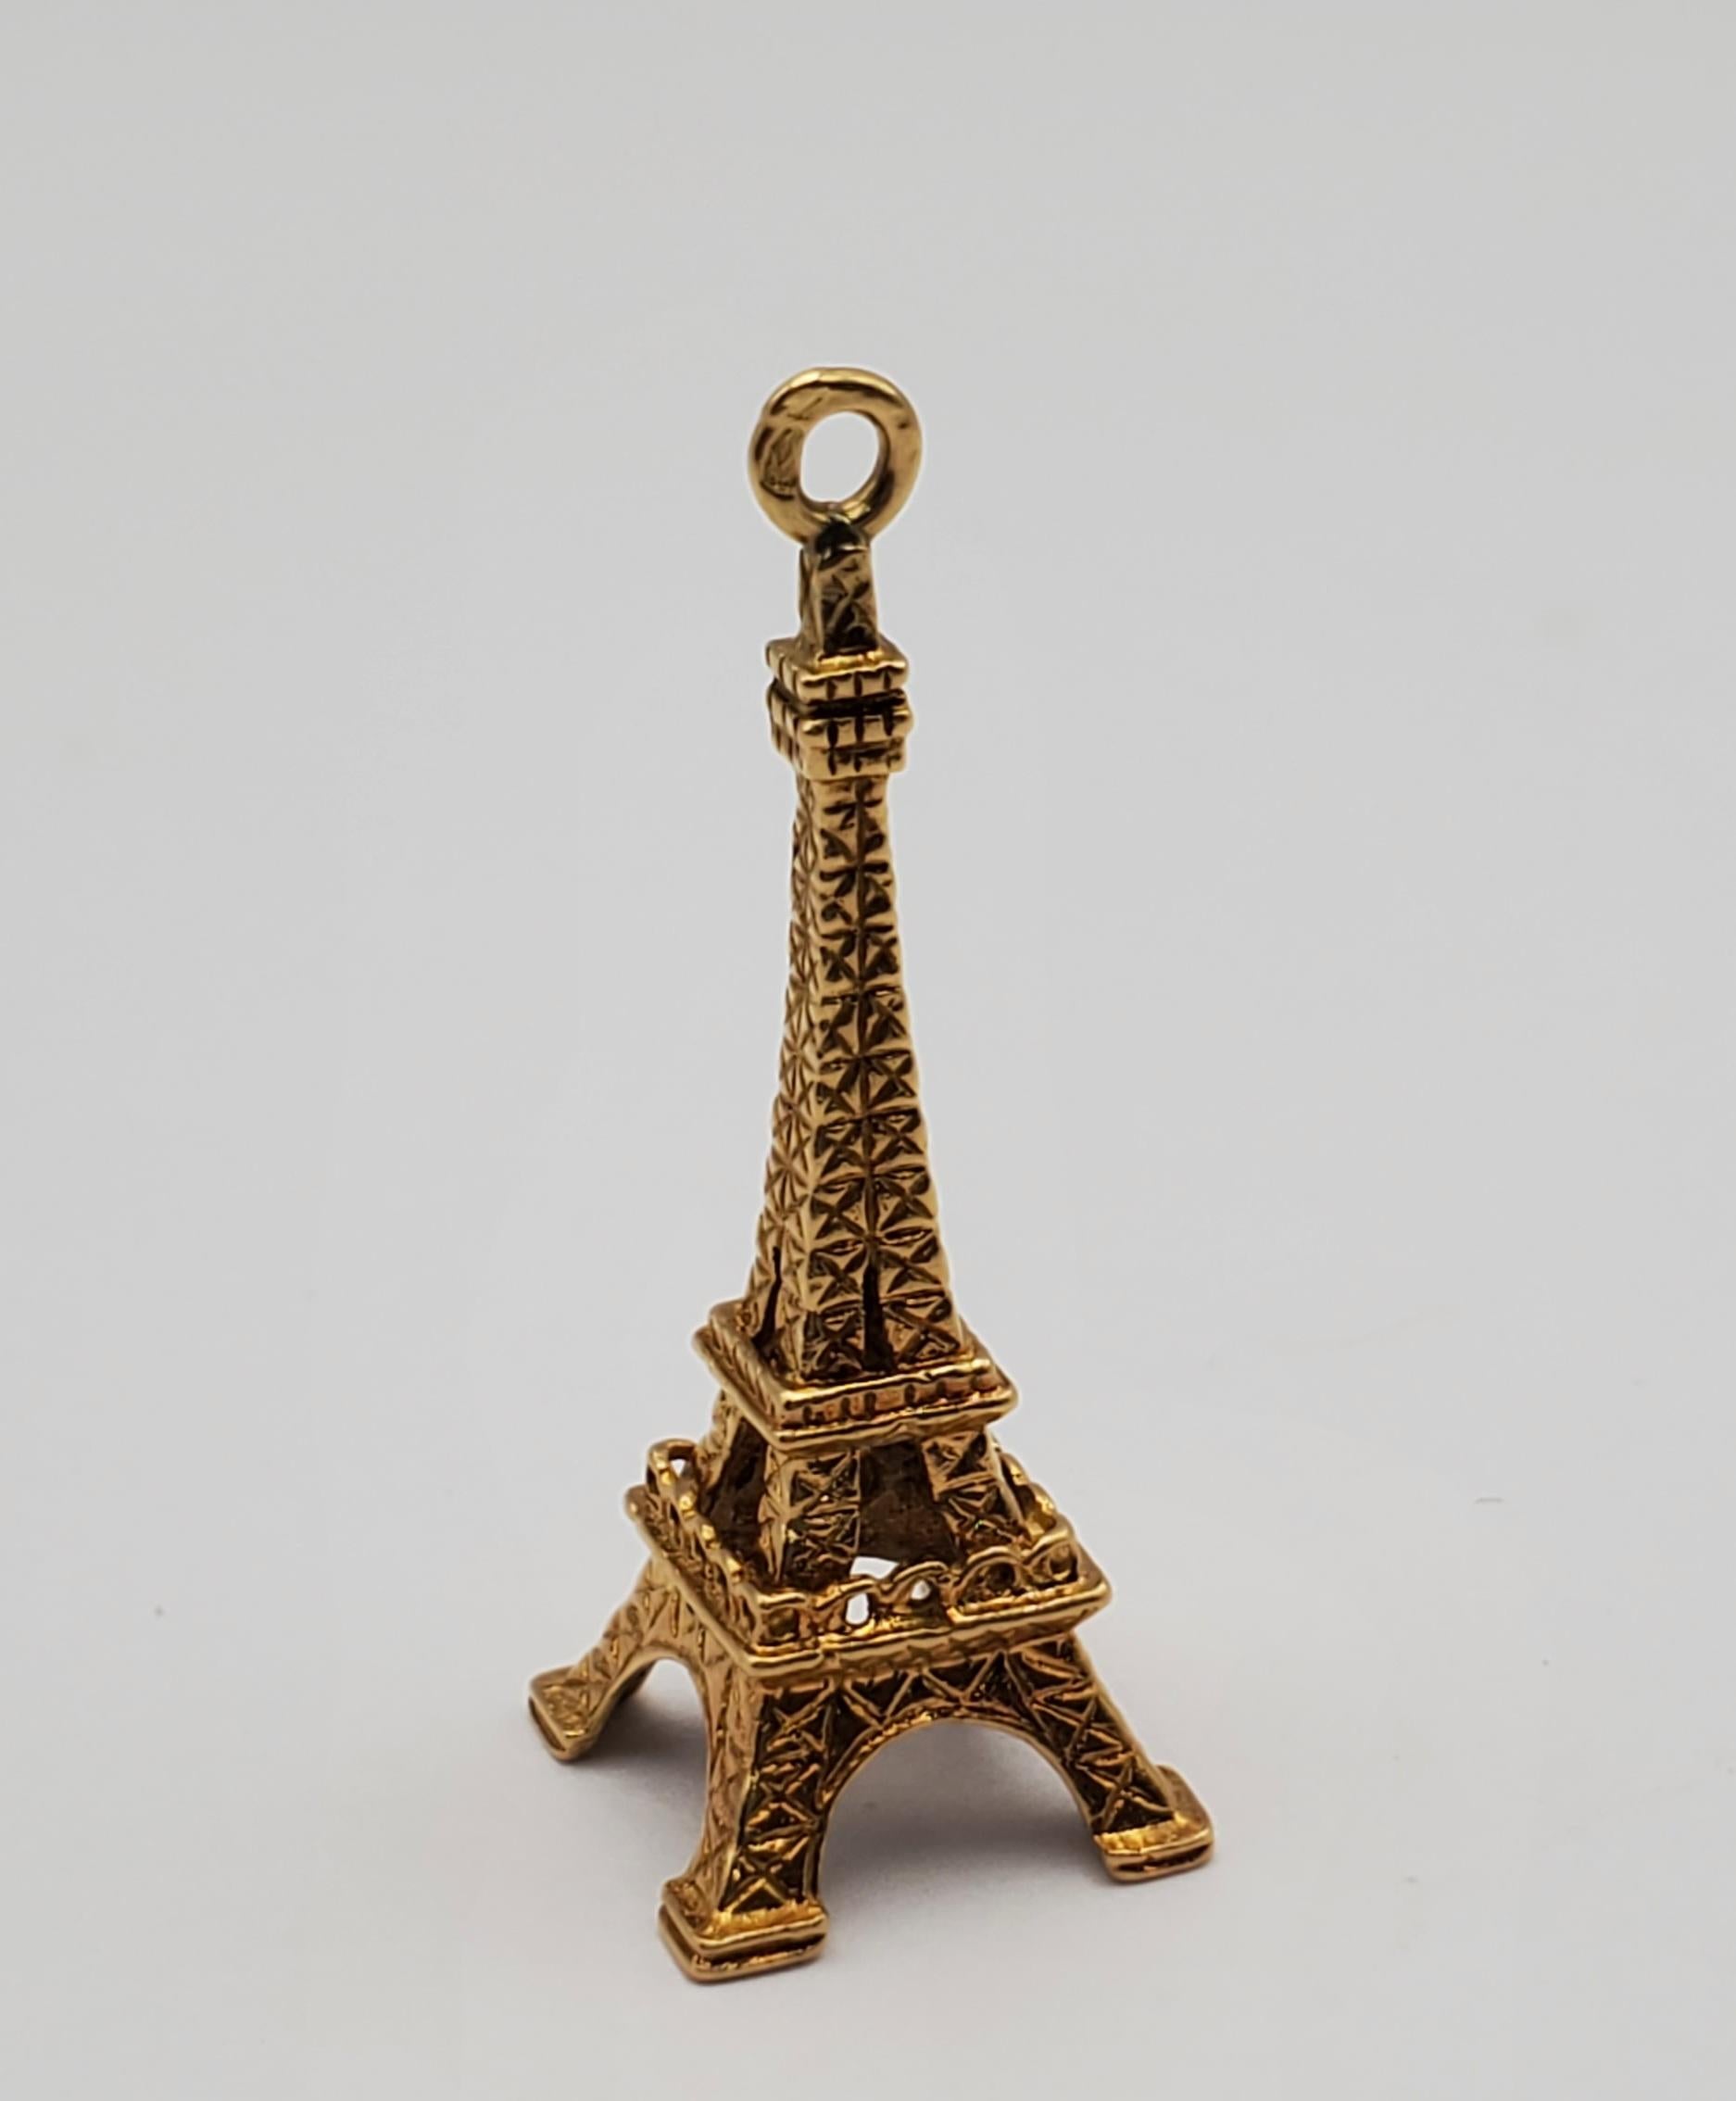 14K Solid yellow gold beautifully carved Eiffel Tower charm. The charm features intricate detailing reflective of the iconic landmark. It could be added to a charm bracelet as a timeless souvenir or worn on a chain as a unique pendant. 

The piece